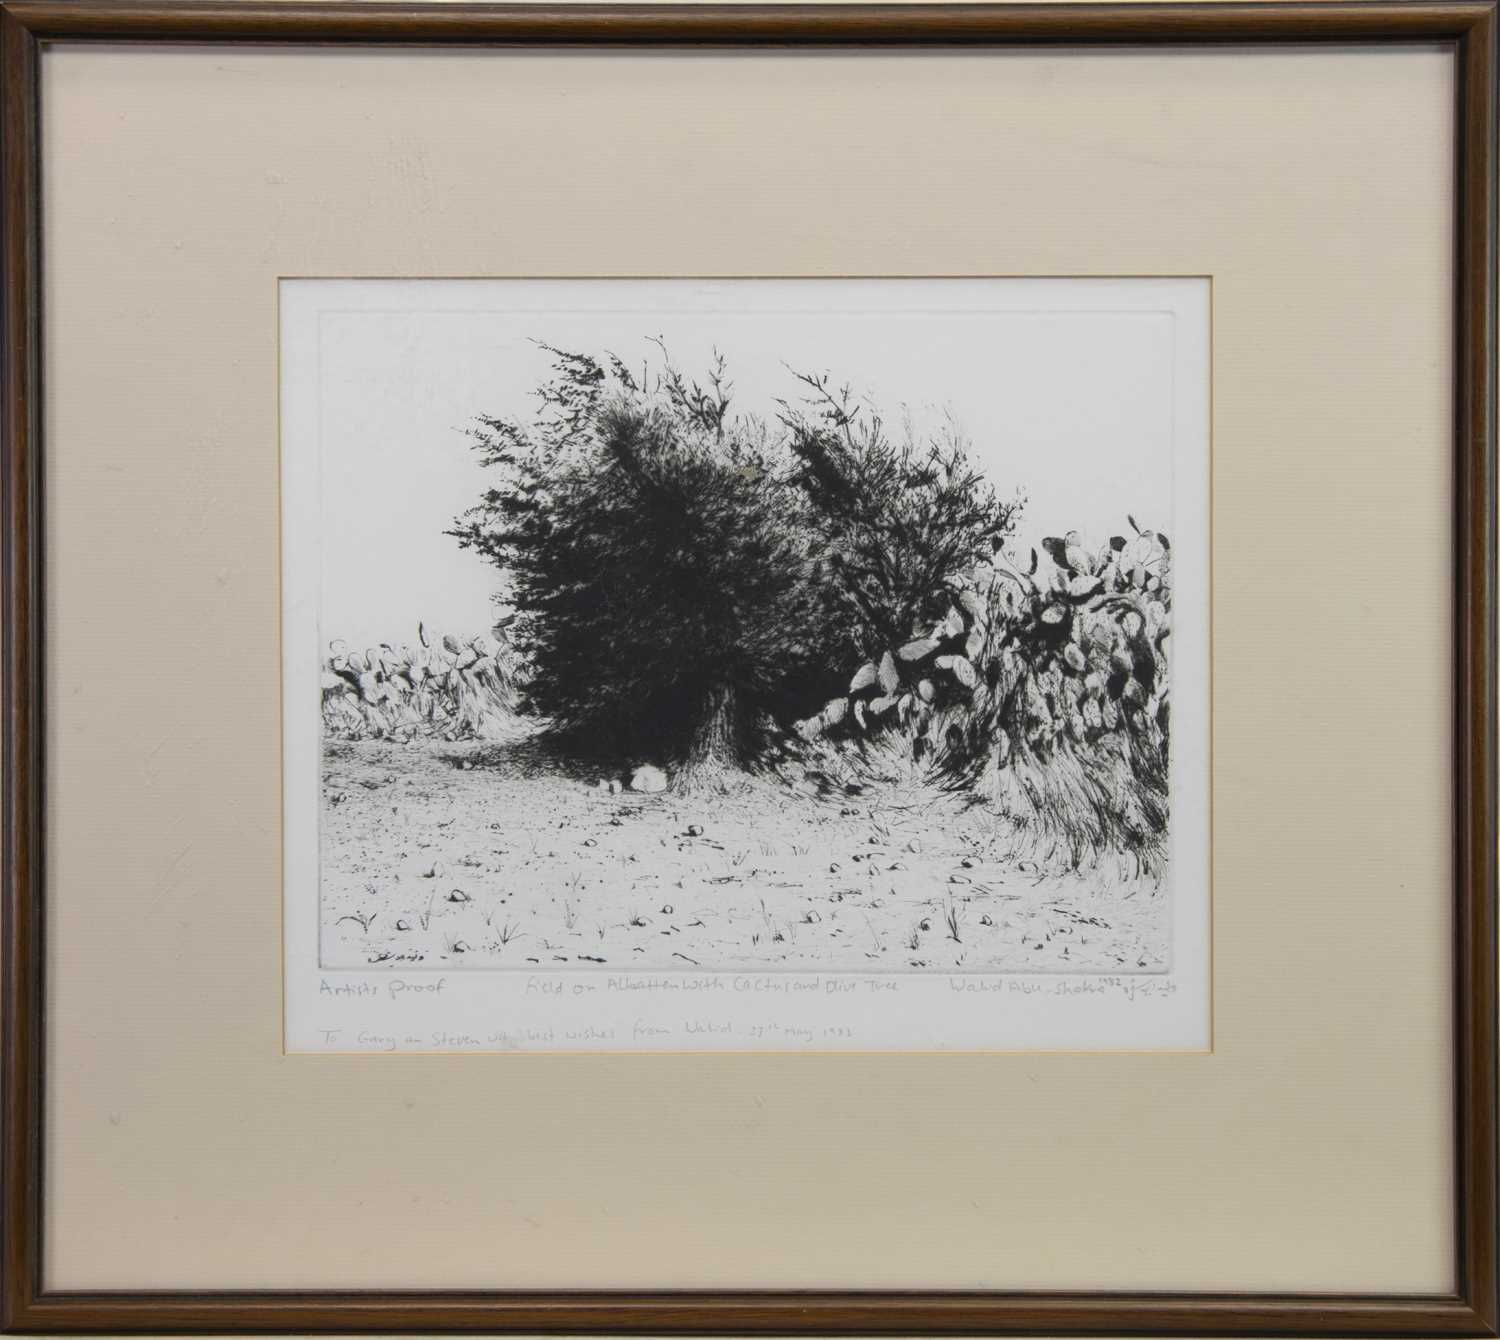 Lot 401 - FIELD ON ALBATTAN WITH CACTUS, AN ETCHING BY WALID ABU-SHAKRA